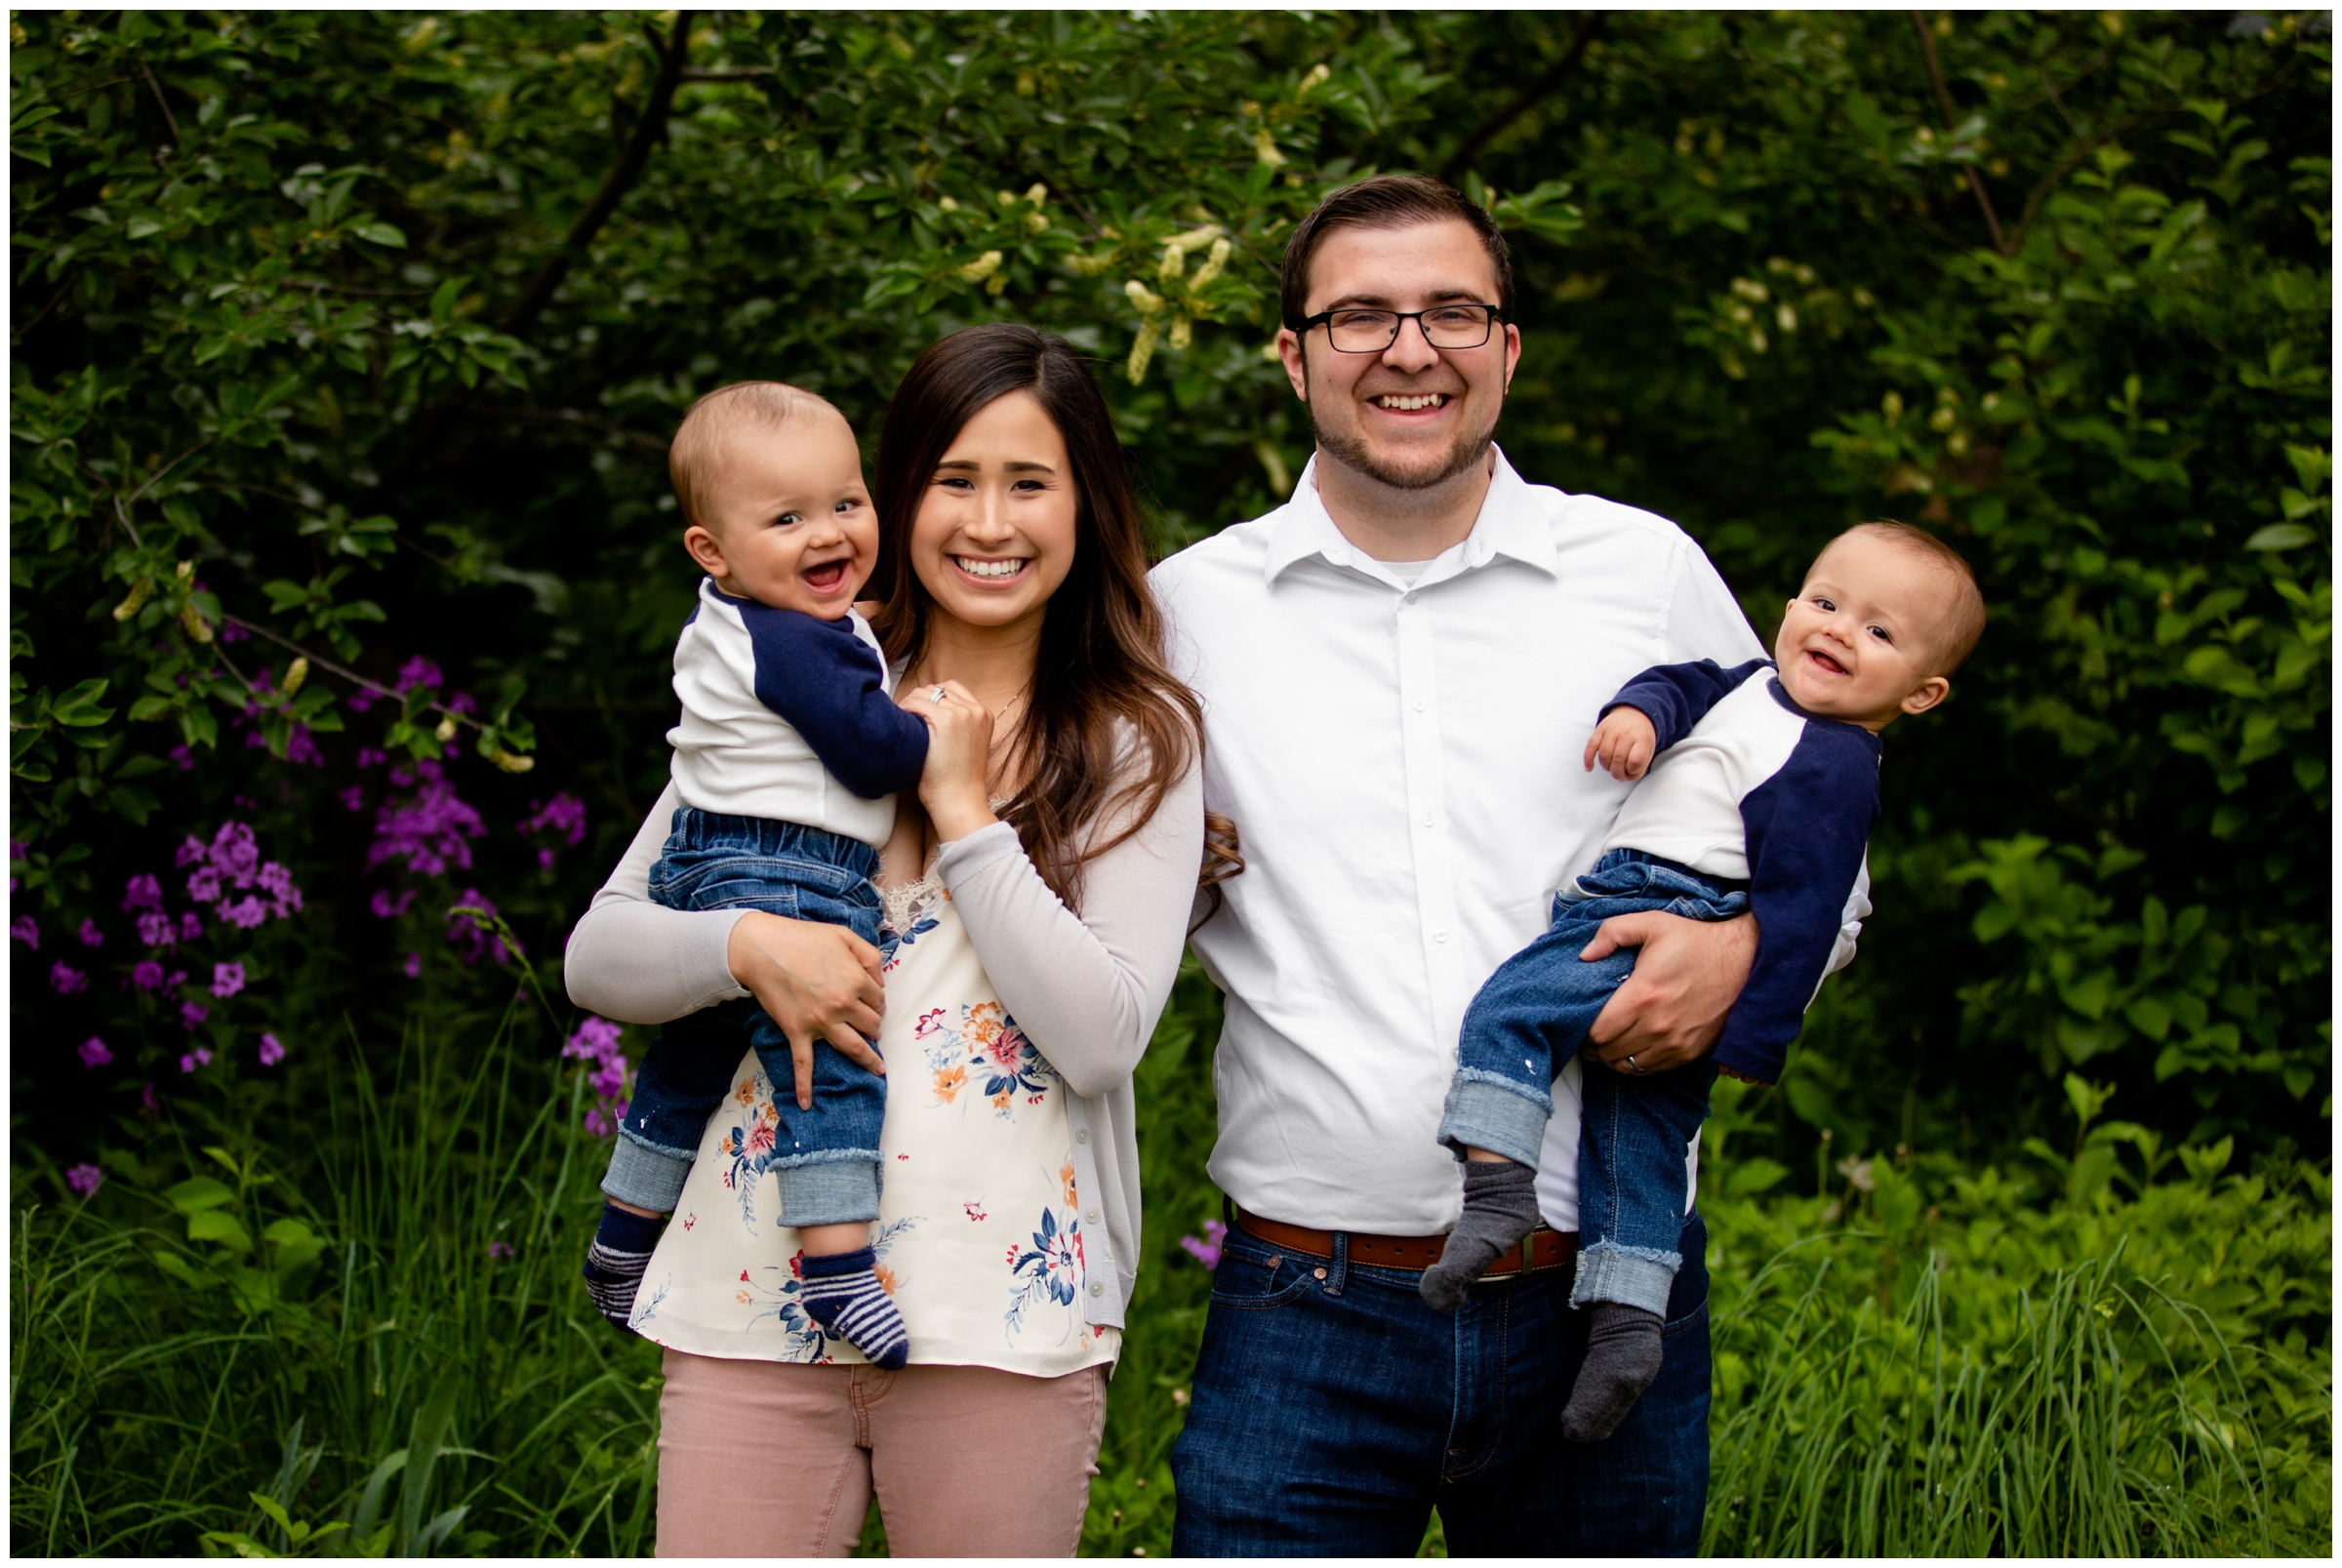 Spring Colorado family portraits at Old Mill Park by Longmont family photographers Plum Pretty Photography